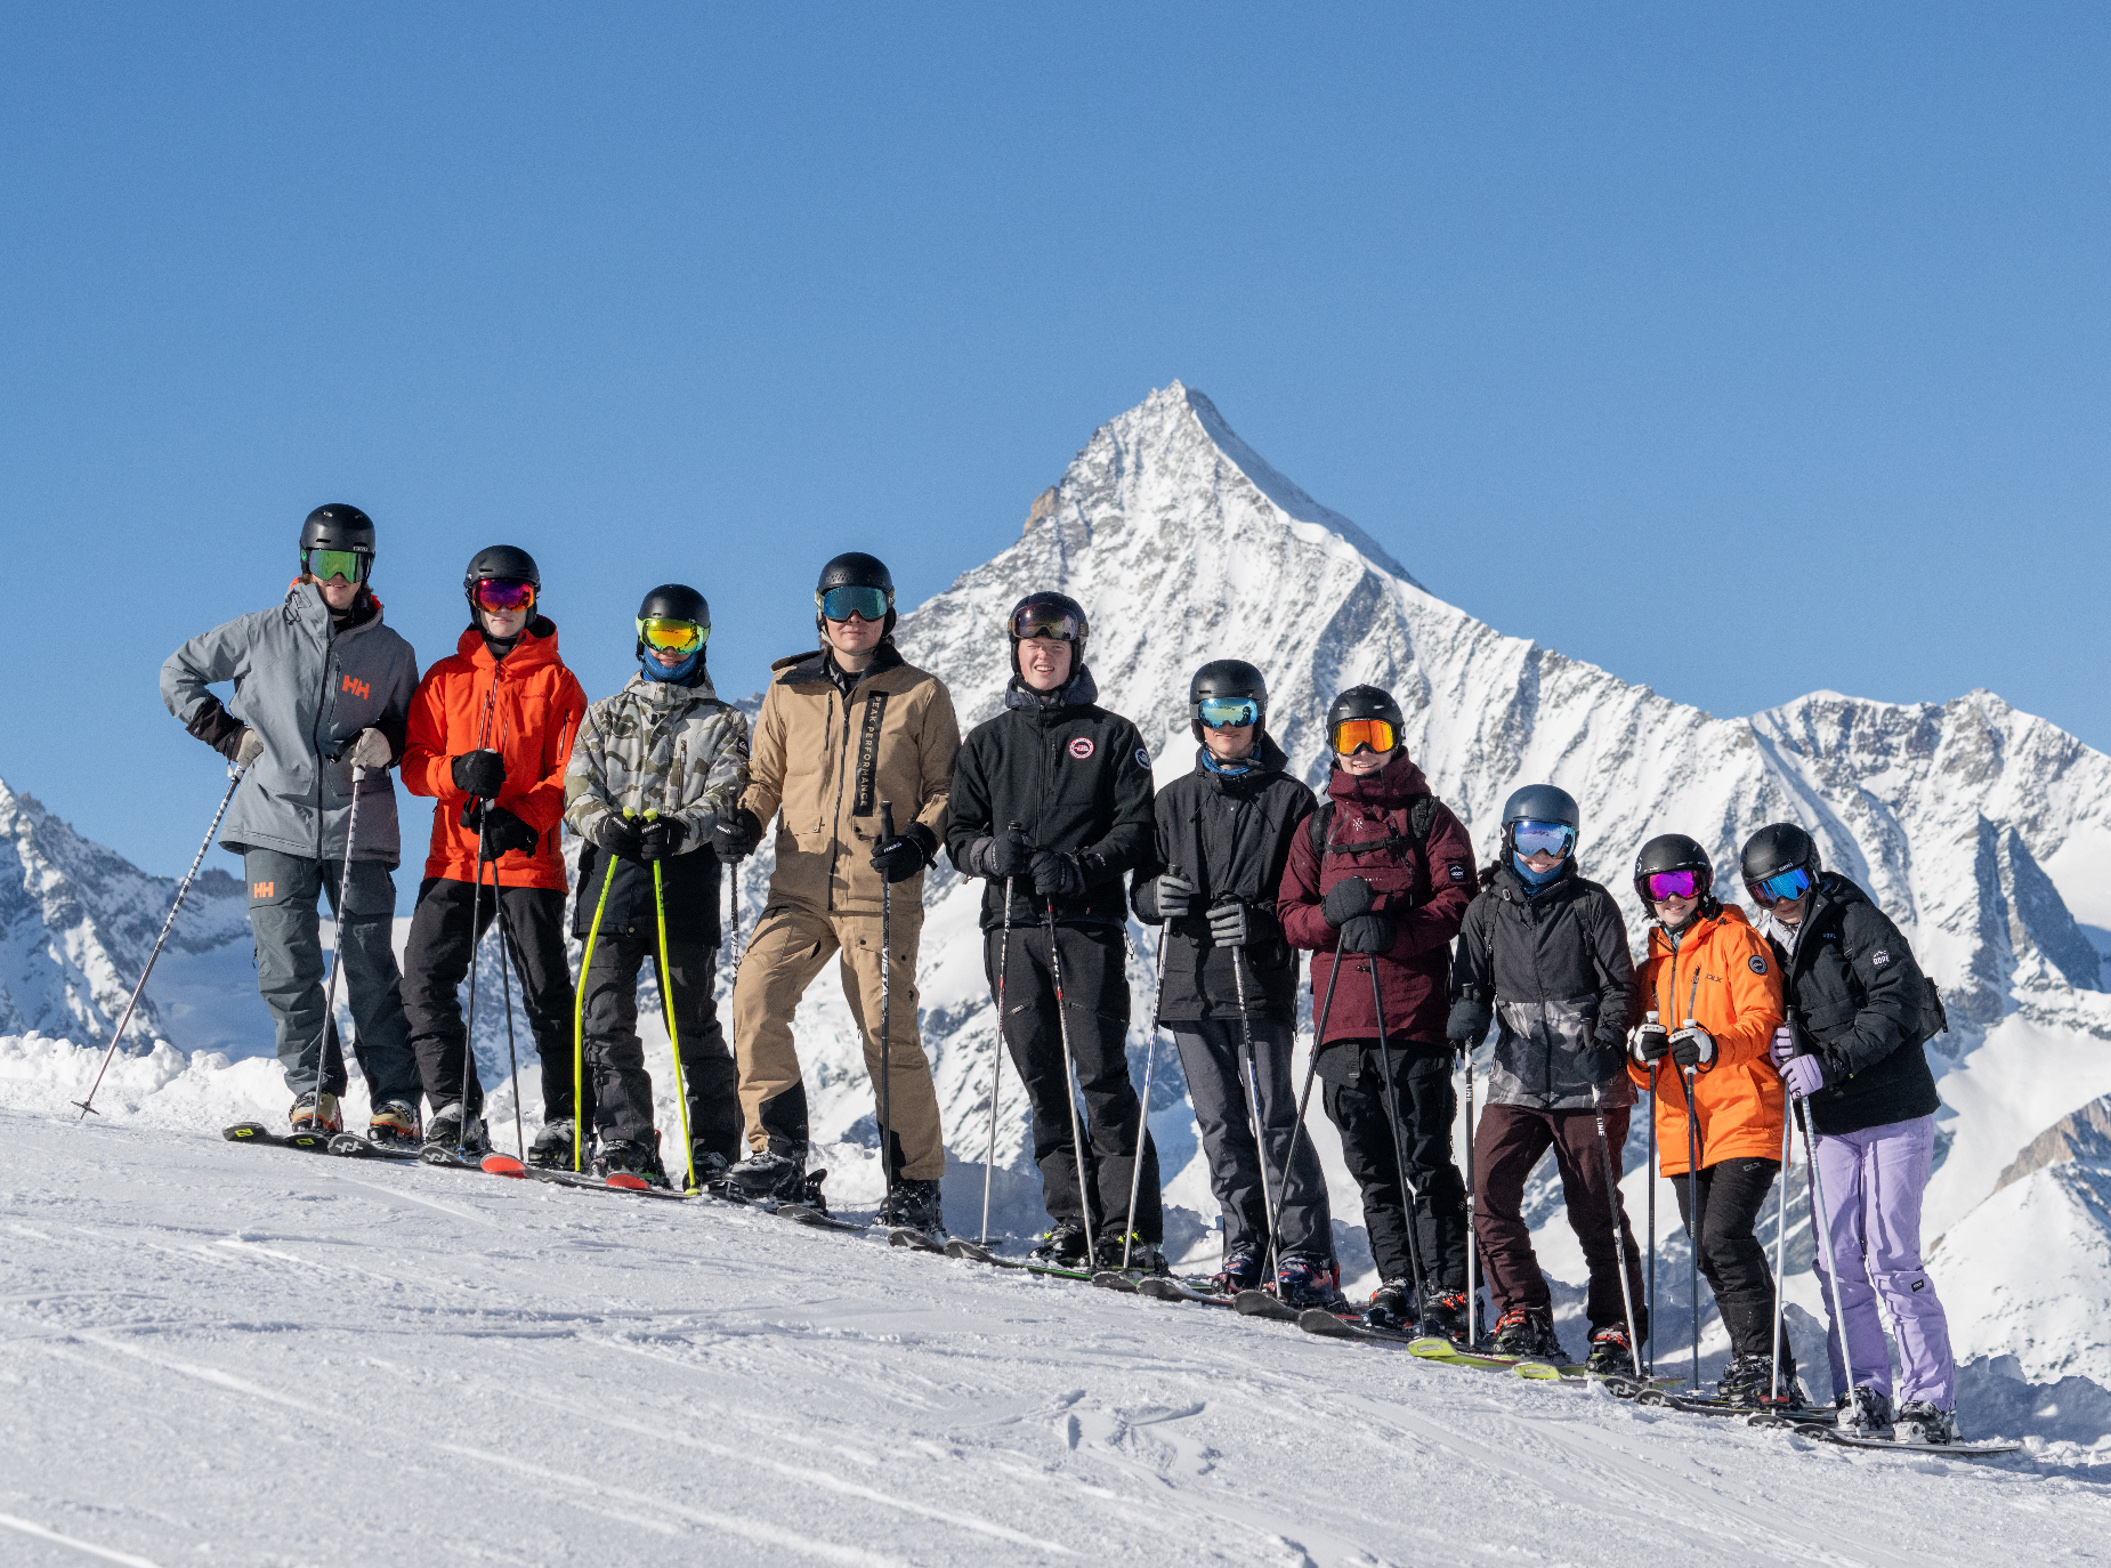 10 skiers line up along the edge of a piste, a high mountain in the backdrop, for a photo